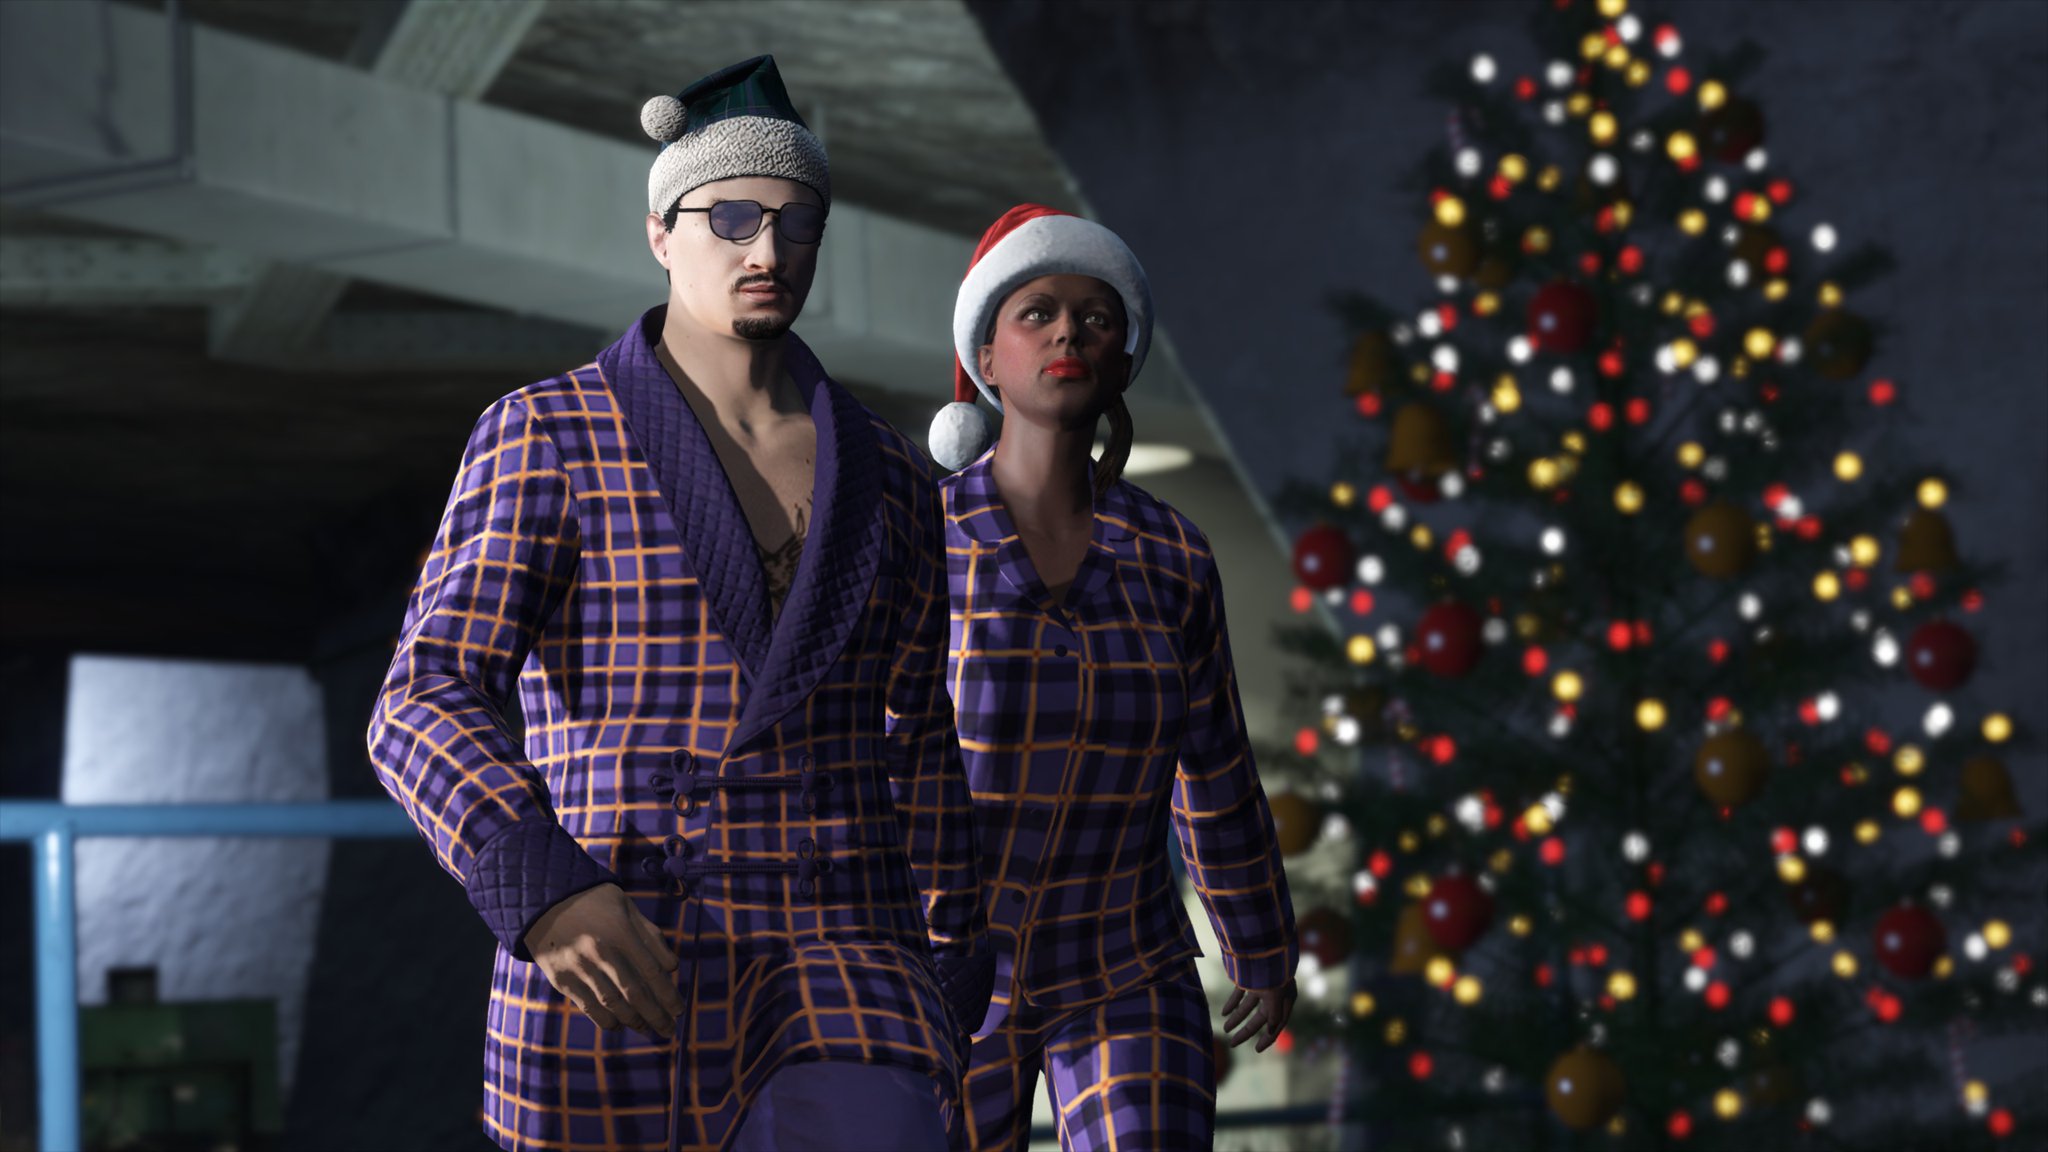 GTA Characters in Christmas robes standing in front of a lit up Christmas tree